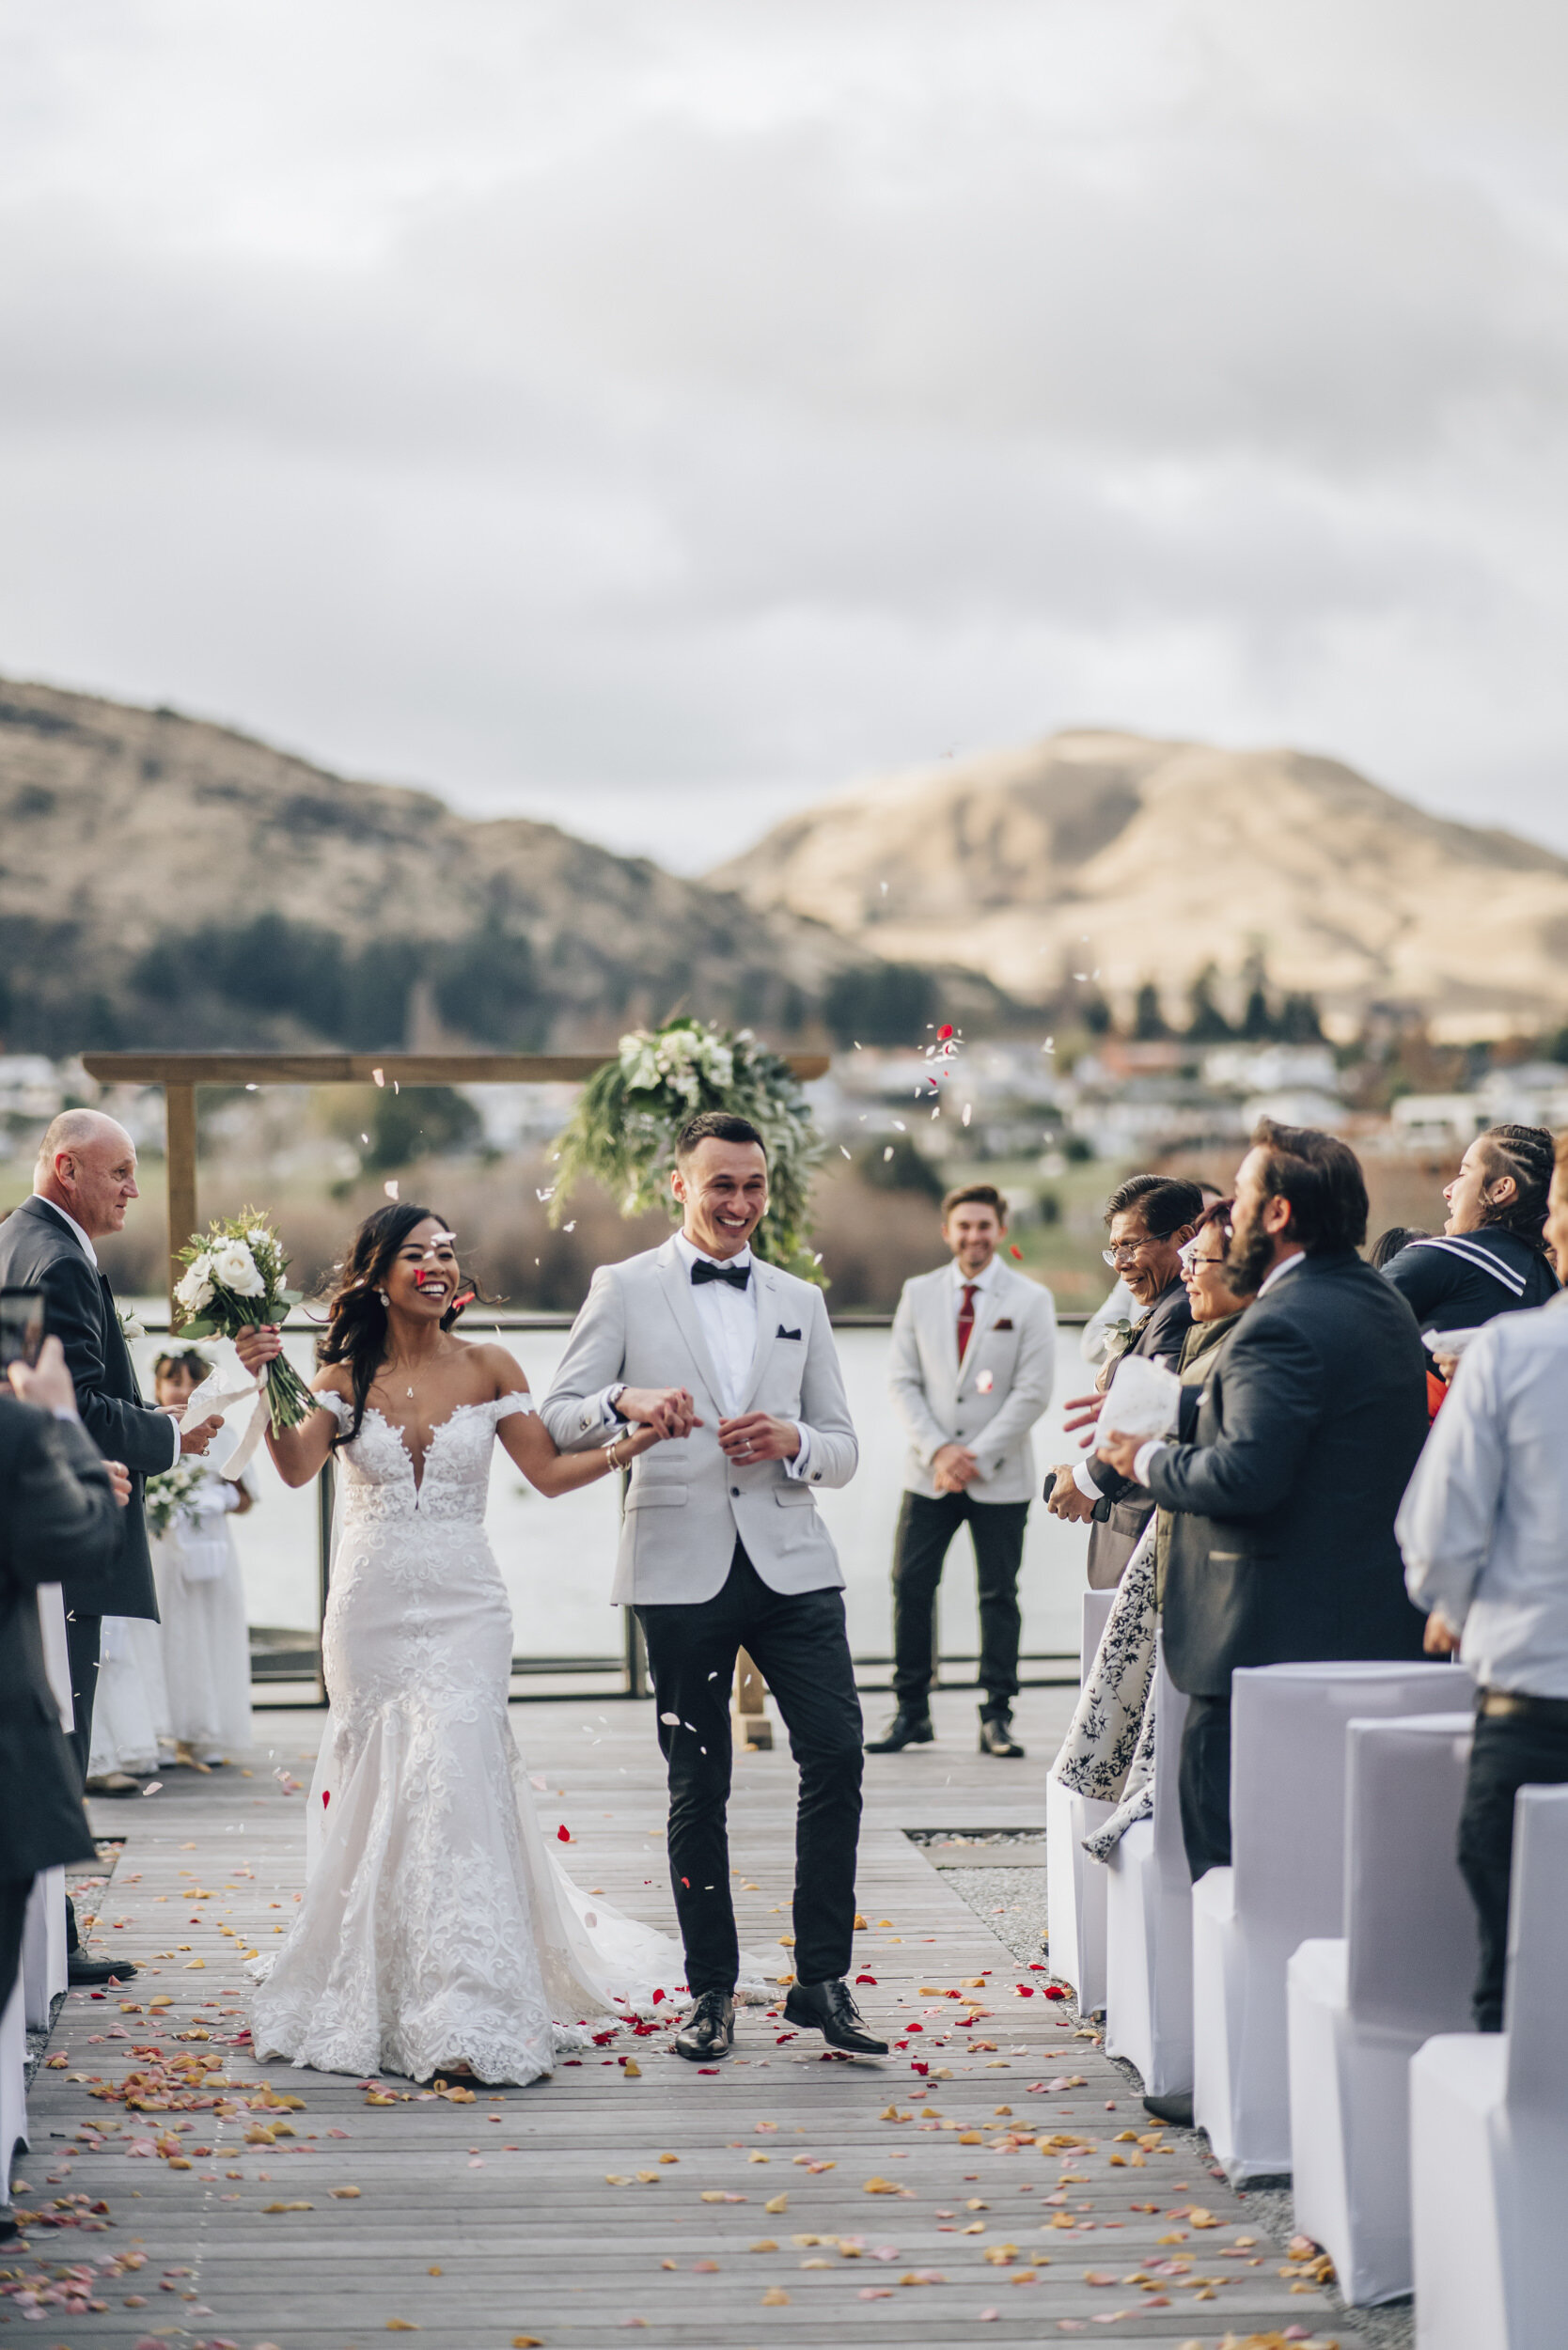 Auckland Wedding Photographer and Videography | Queenstown Wedding Venue | Heli Wedding Photography | Hilton Queenstown Resort &amp; Spa | Destination Wedding Photography